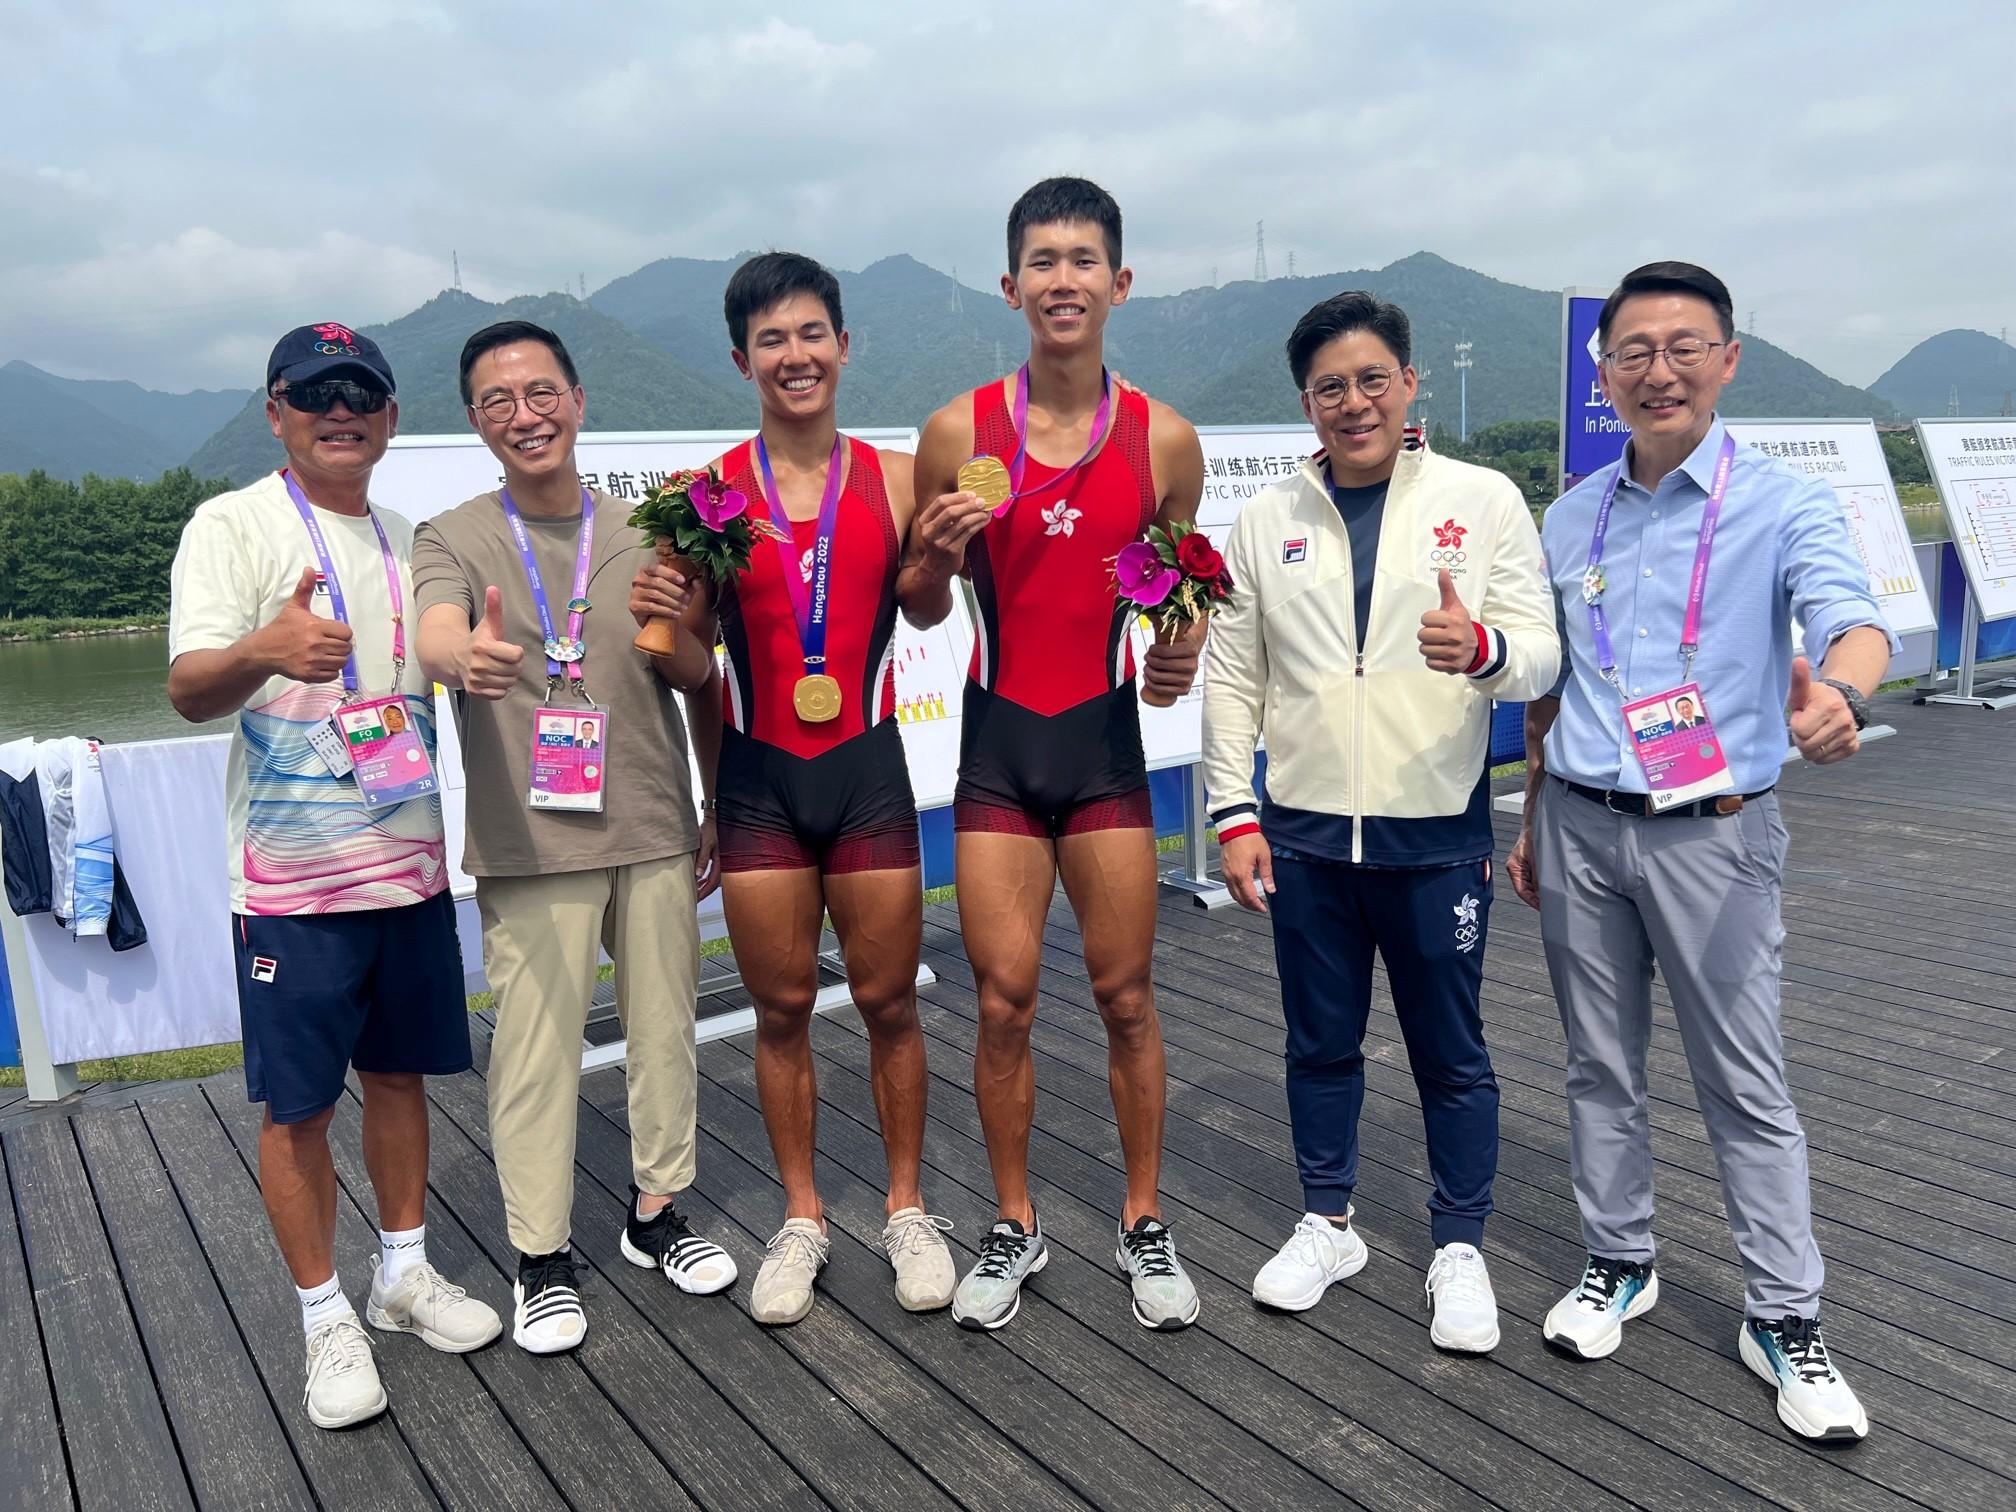 The Secretary for Culture, Sports and Tourism, Mr Kevin Yeung (second left), today (September 24) congratulated rowing athletes Lam San-tung (third left) and Wong Wai-chun (third right) on winning a gold medal in Rowing Men's Pair at the 19th Asian Games Hangzhou (Asian Games). This is the first gold medal won by the Hong Kong, China Delegation in the Hangzhou Asian Games this year.